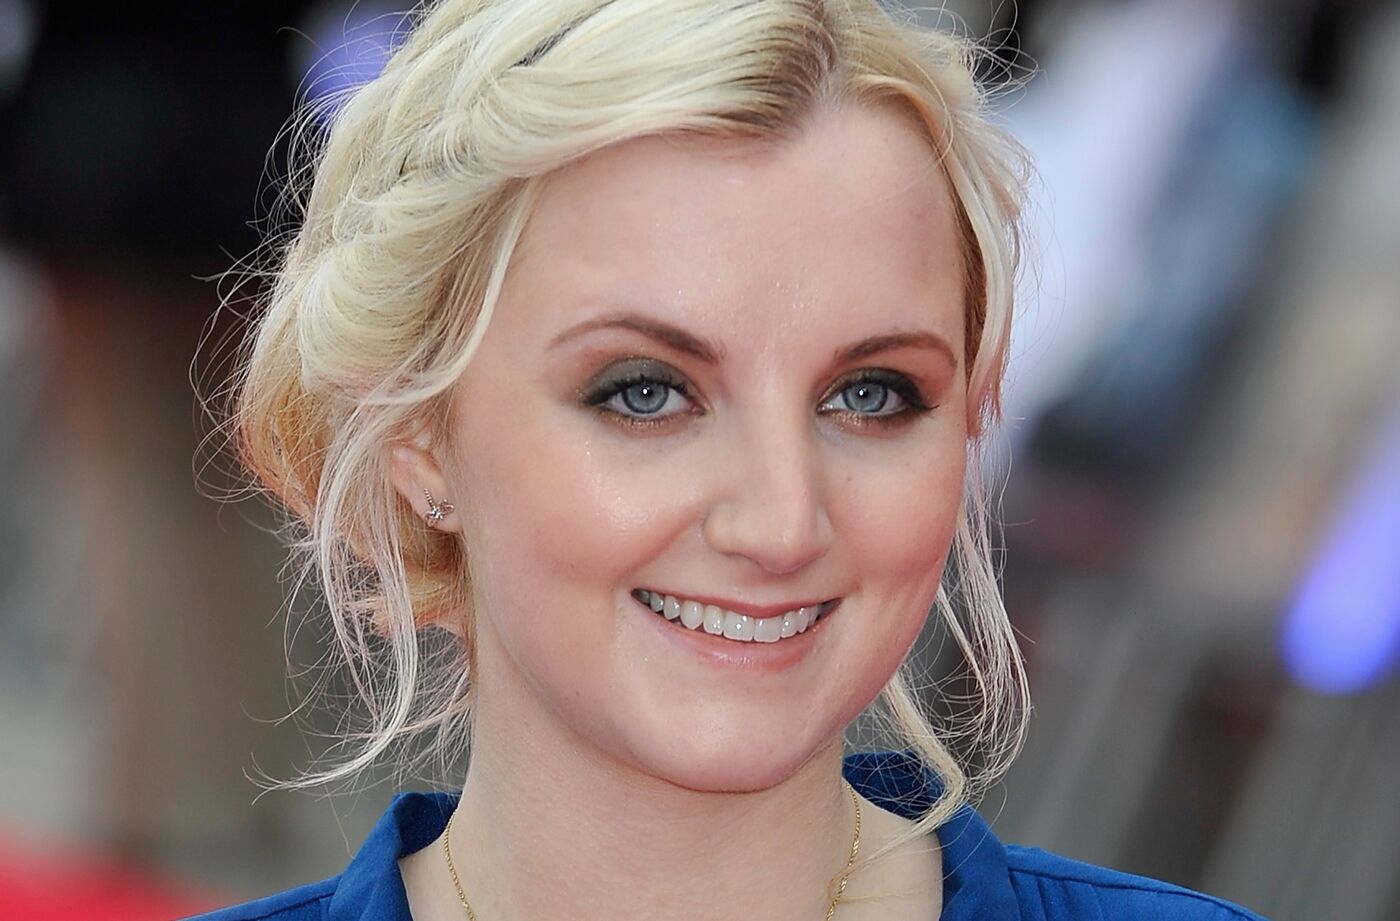 Evanna Lynch to launch cruelty-free makeup box